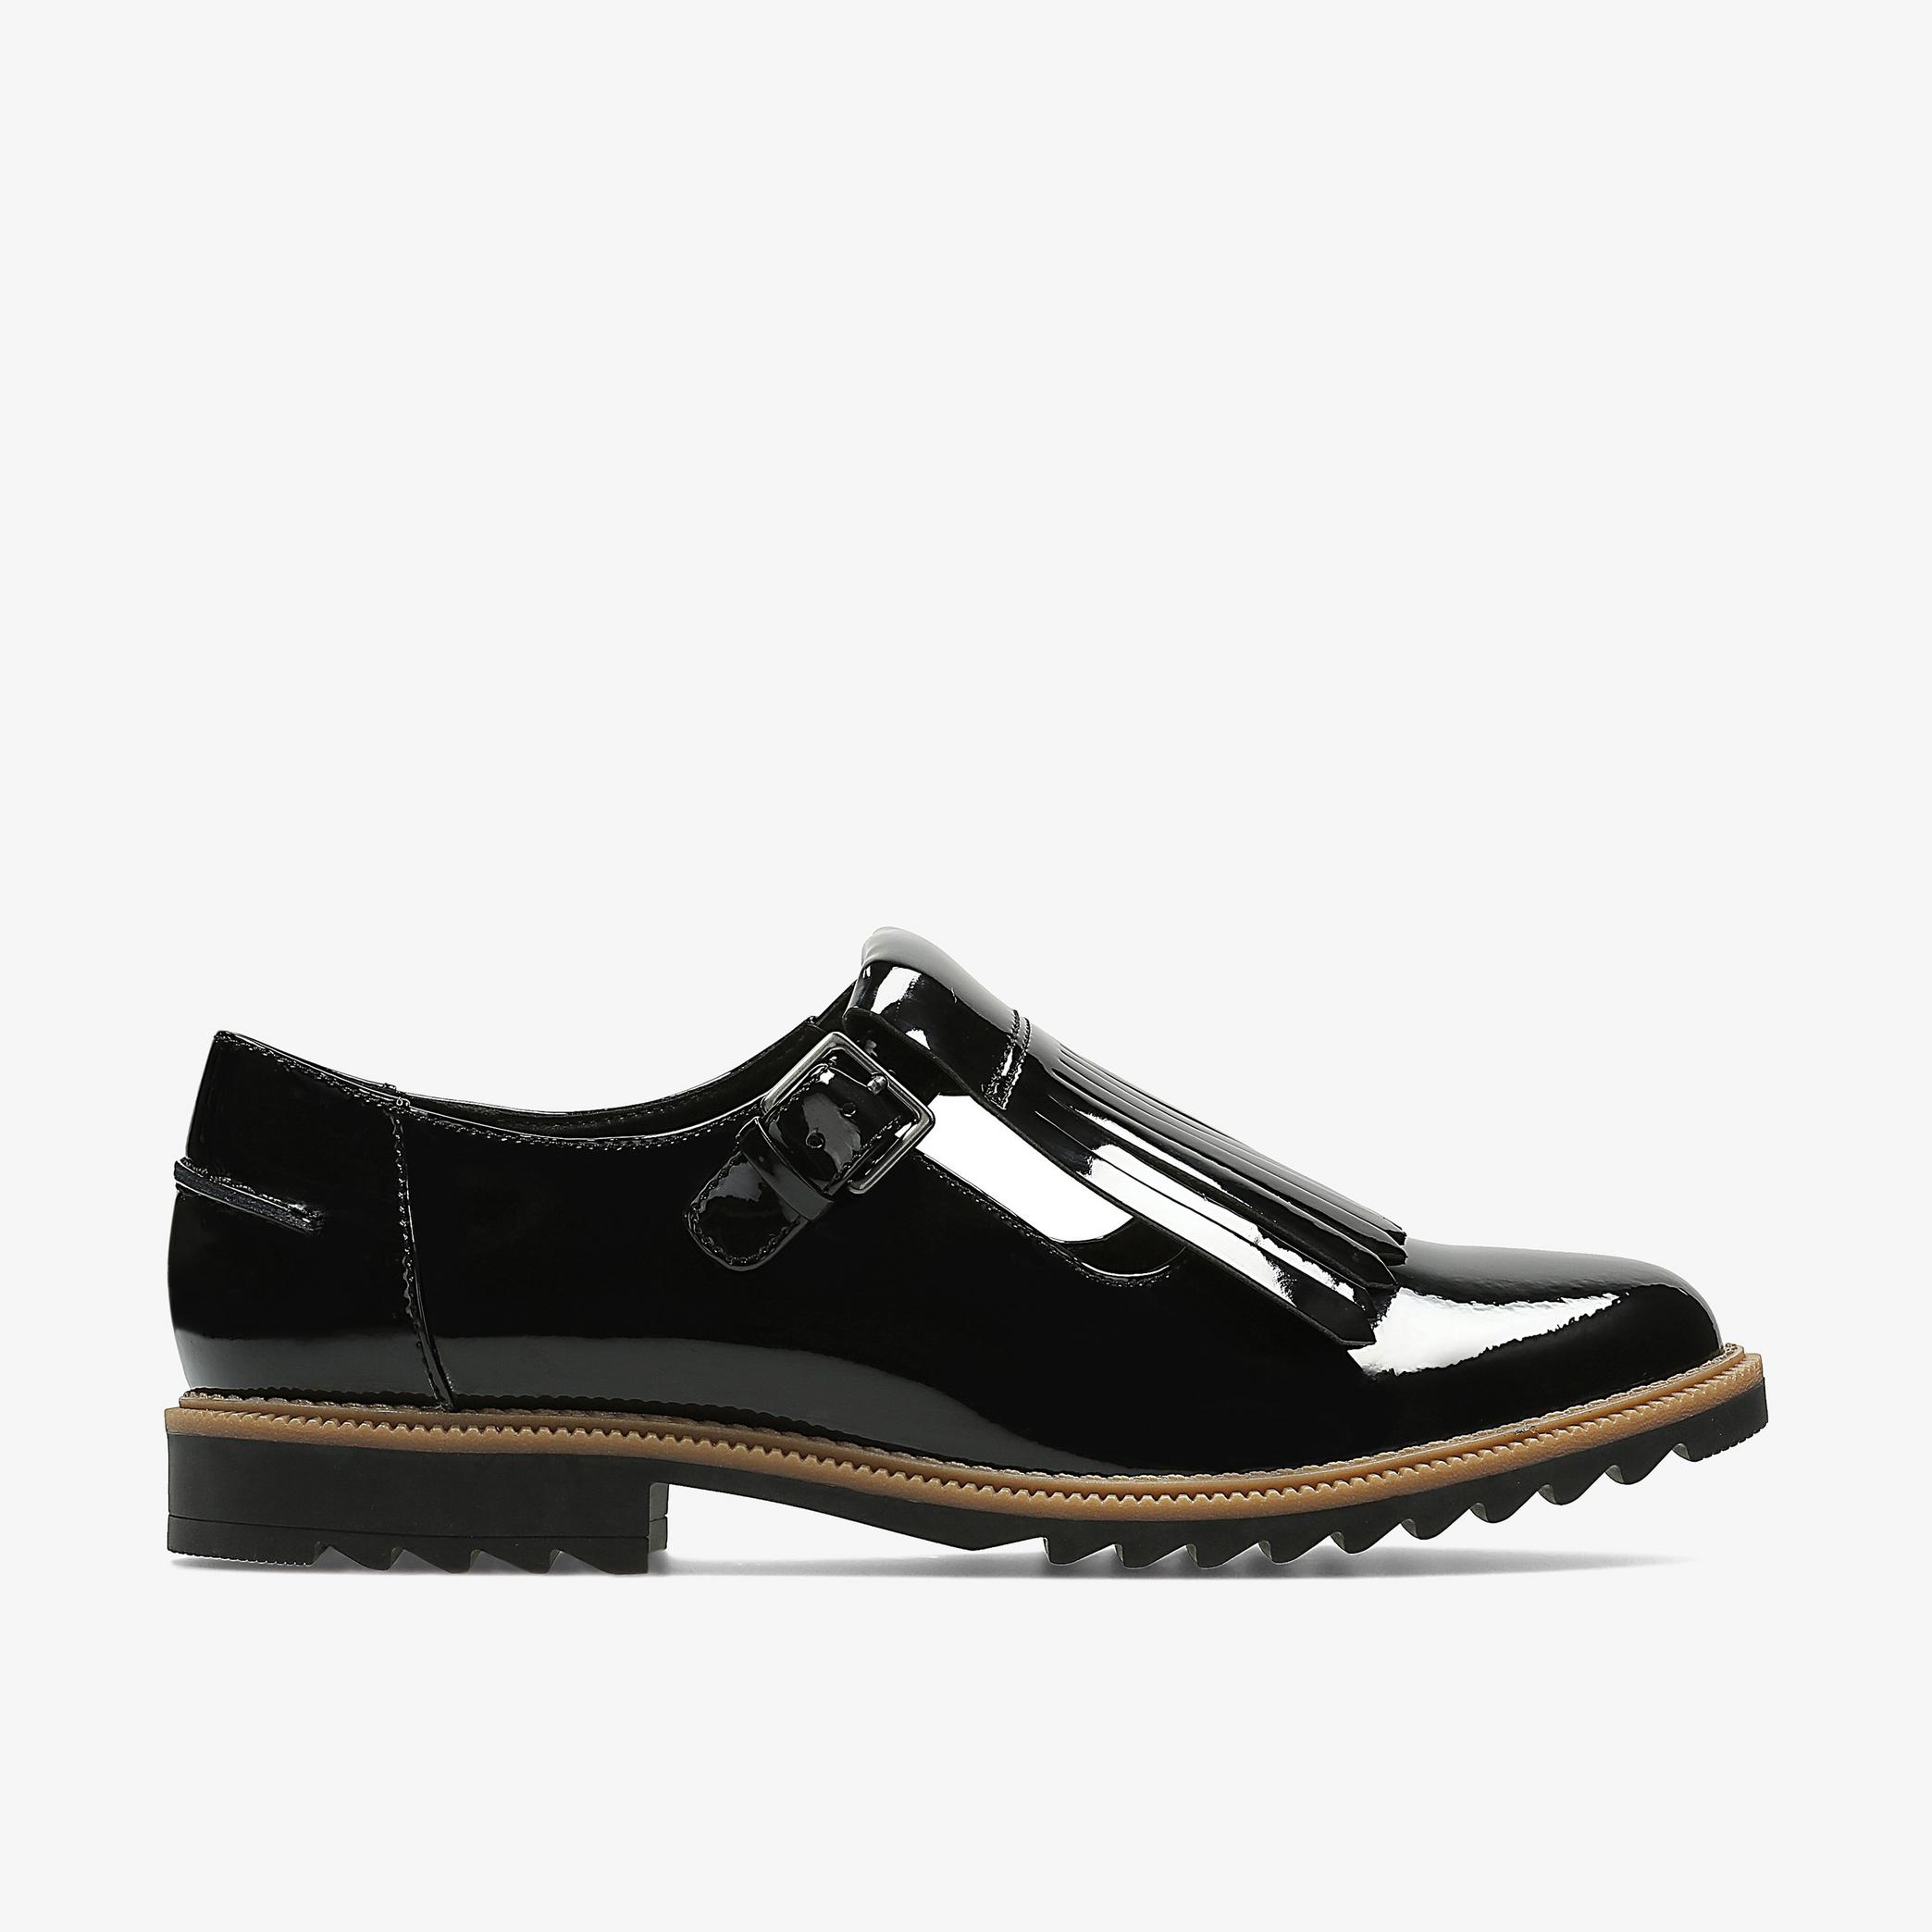 Griffin Mia Black Patent Shoes, view 1 of 6